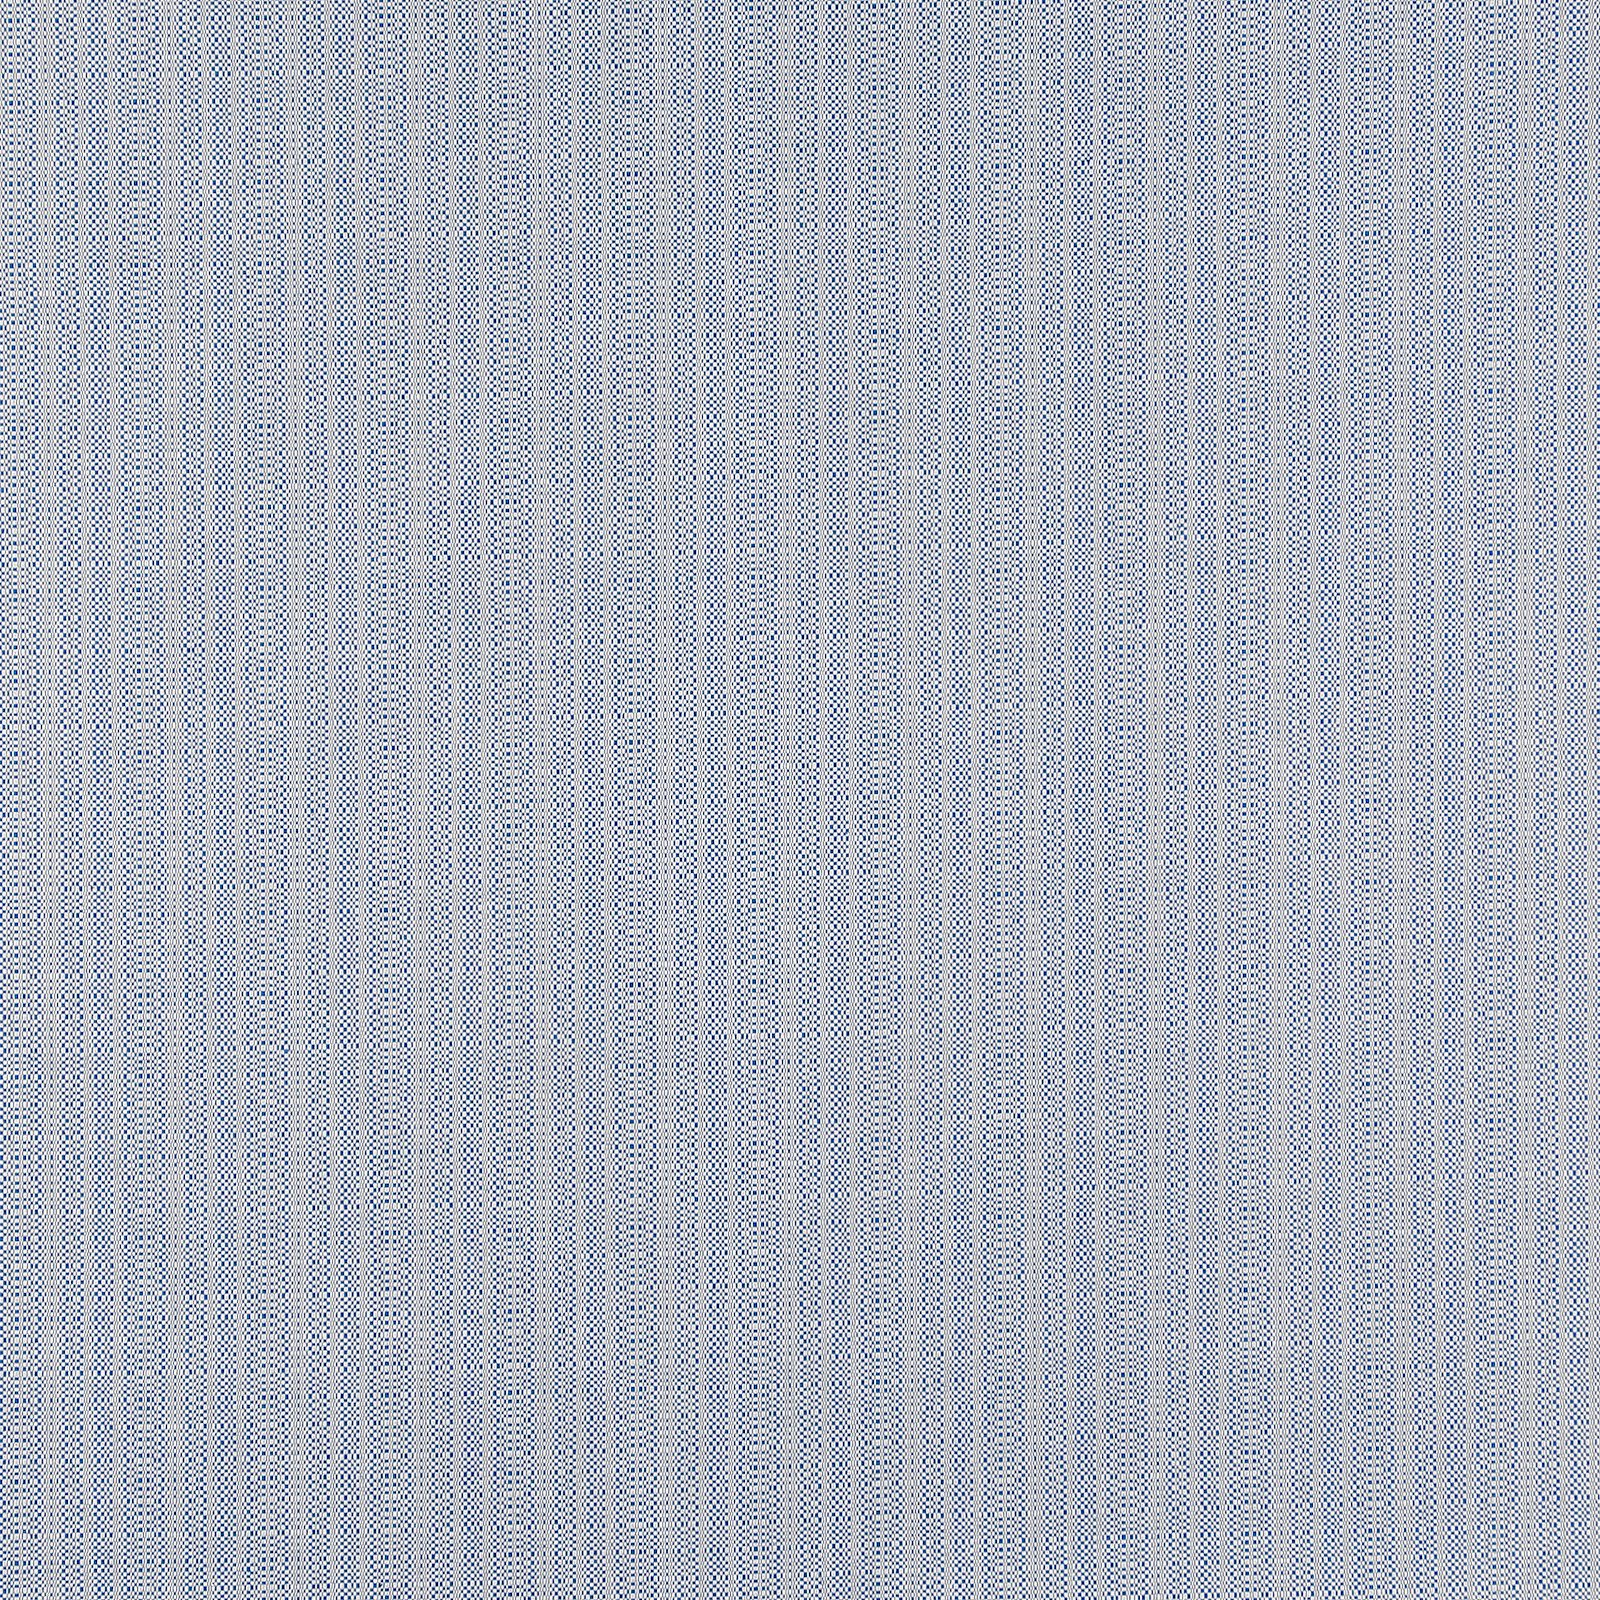 Recycled jacquard off white/blue pattern 780941_pack_sp